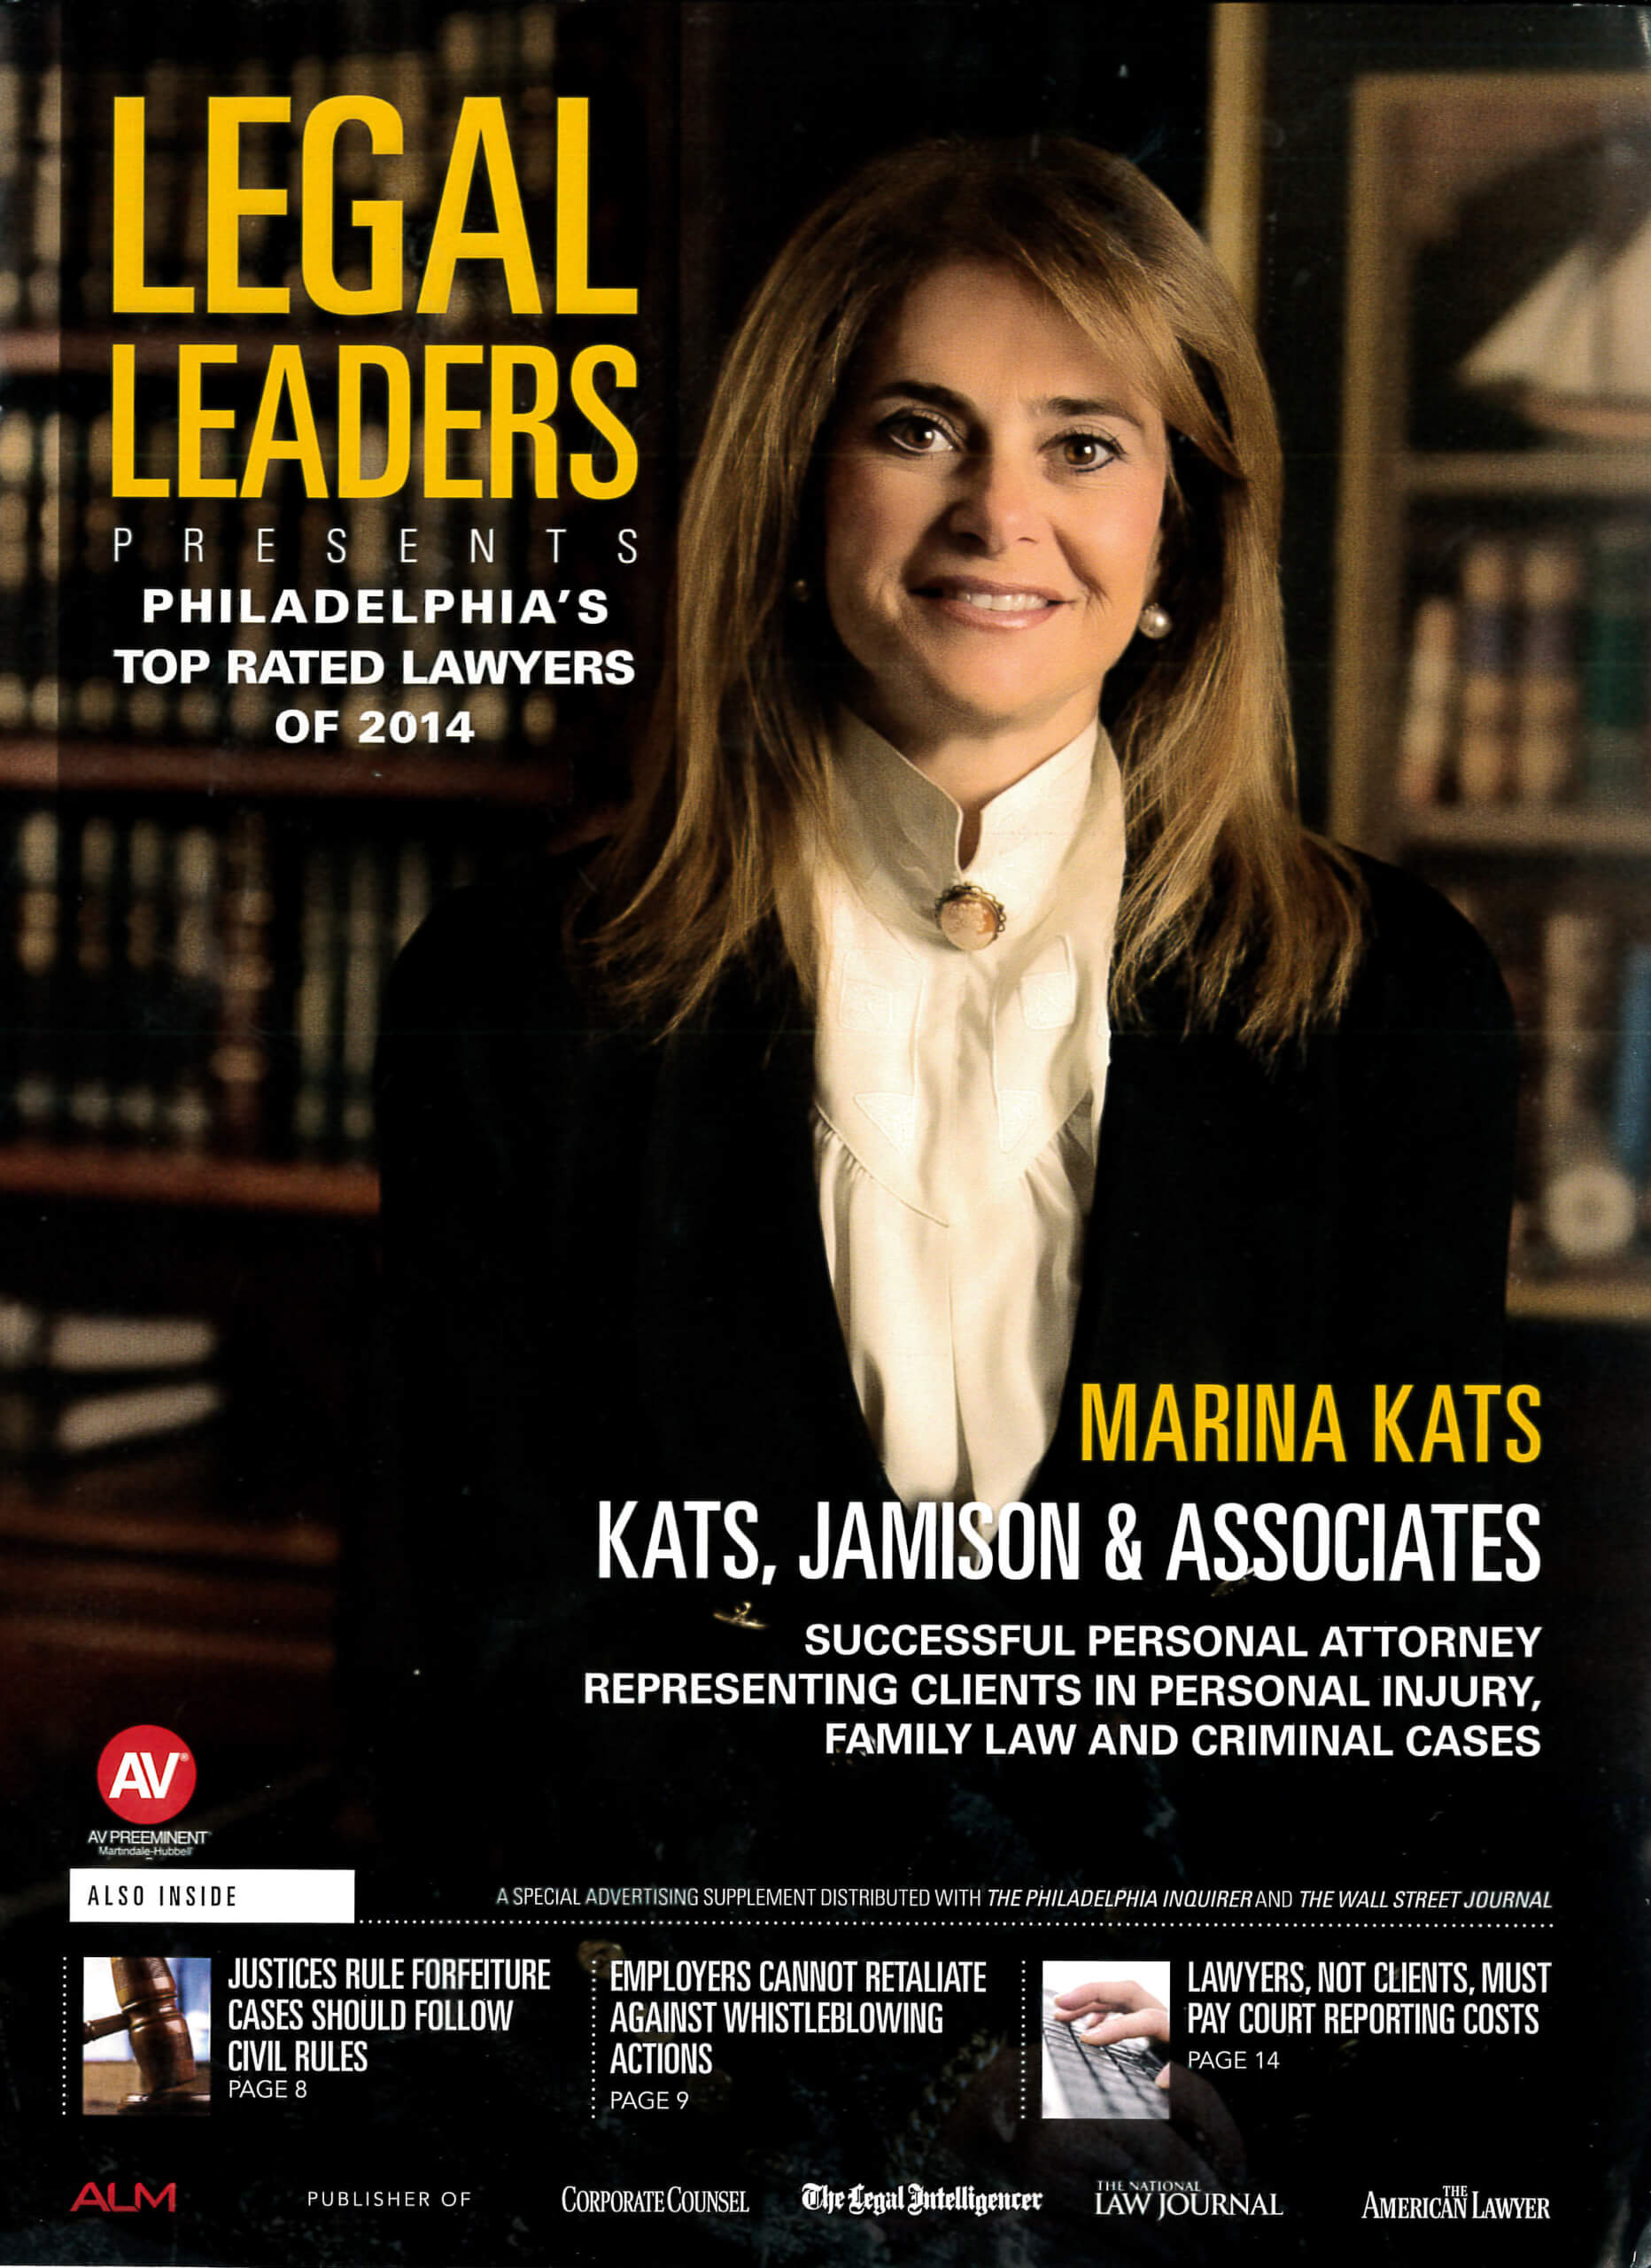 Legal Leader Names Kats Jamison & Associates as one of the Top Rated Lawyers in Philadelphia